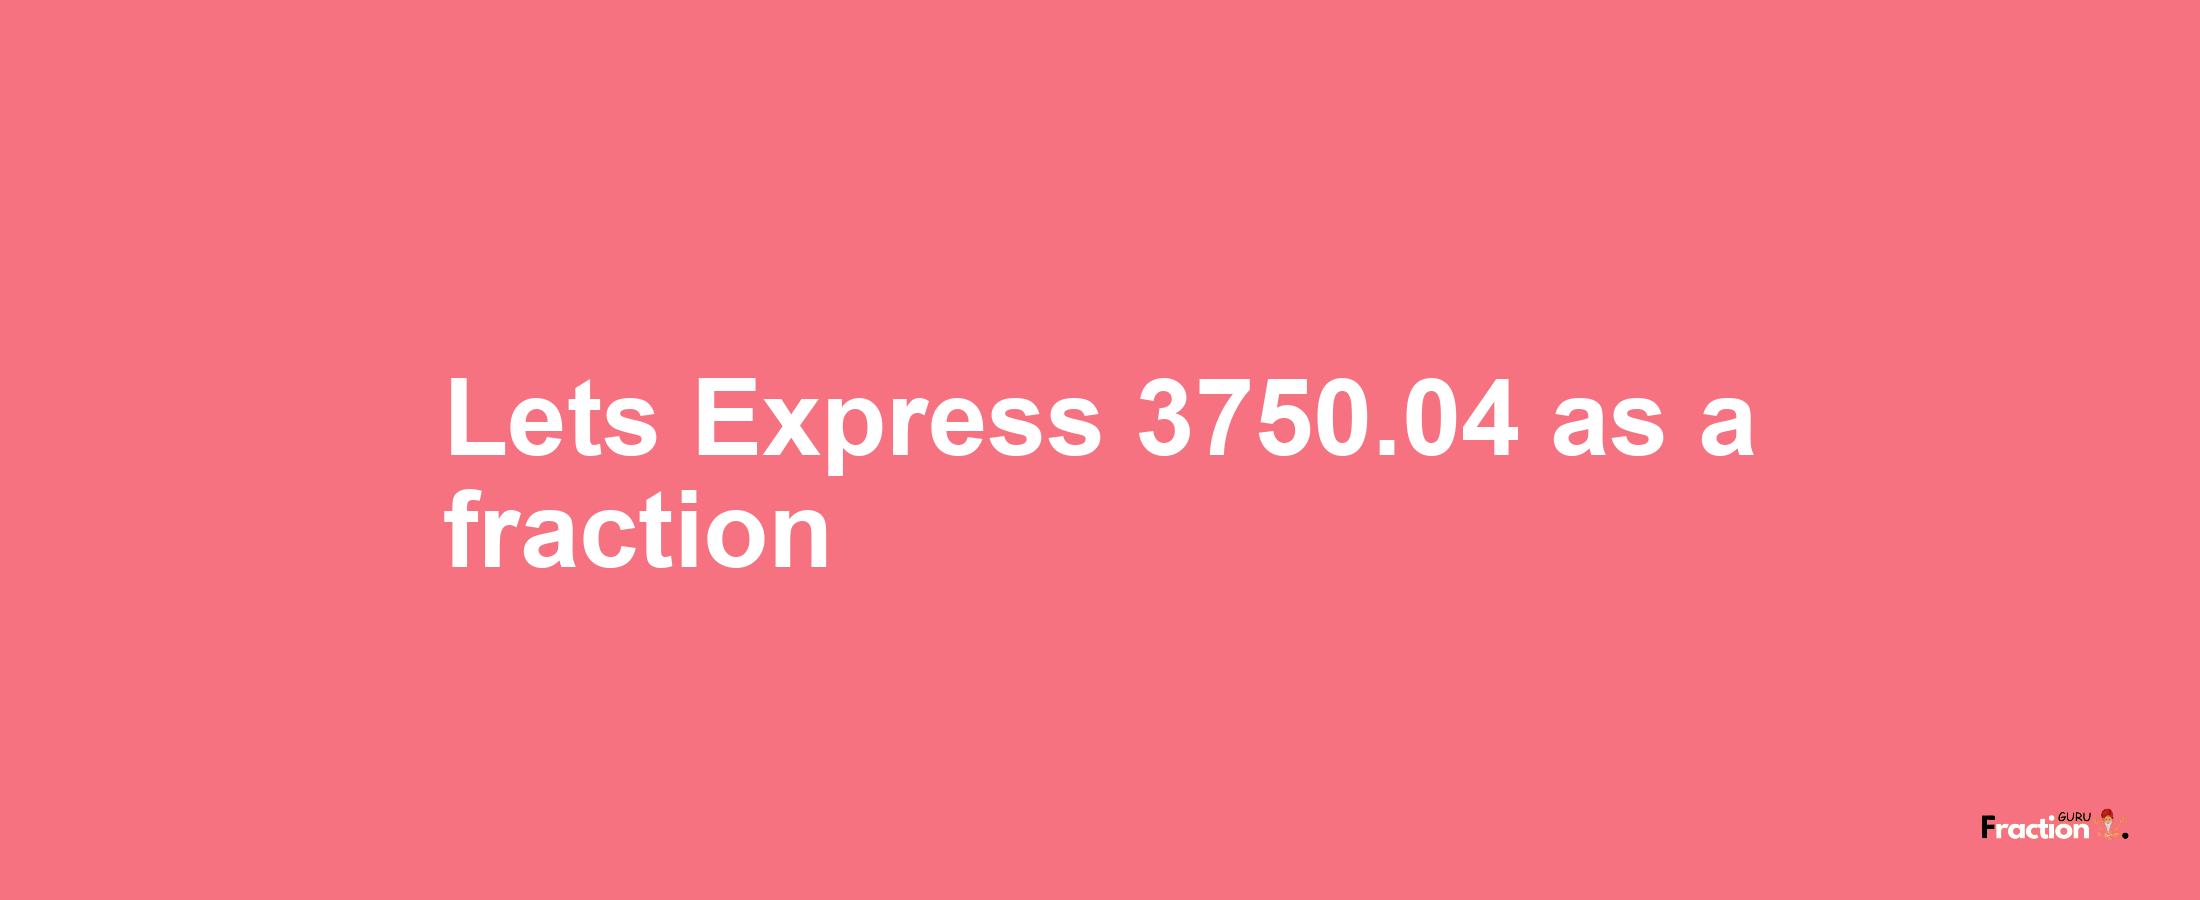 Lets Express 3750.04 as afraction